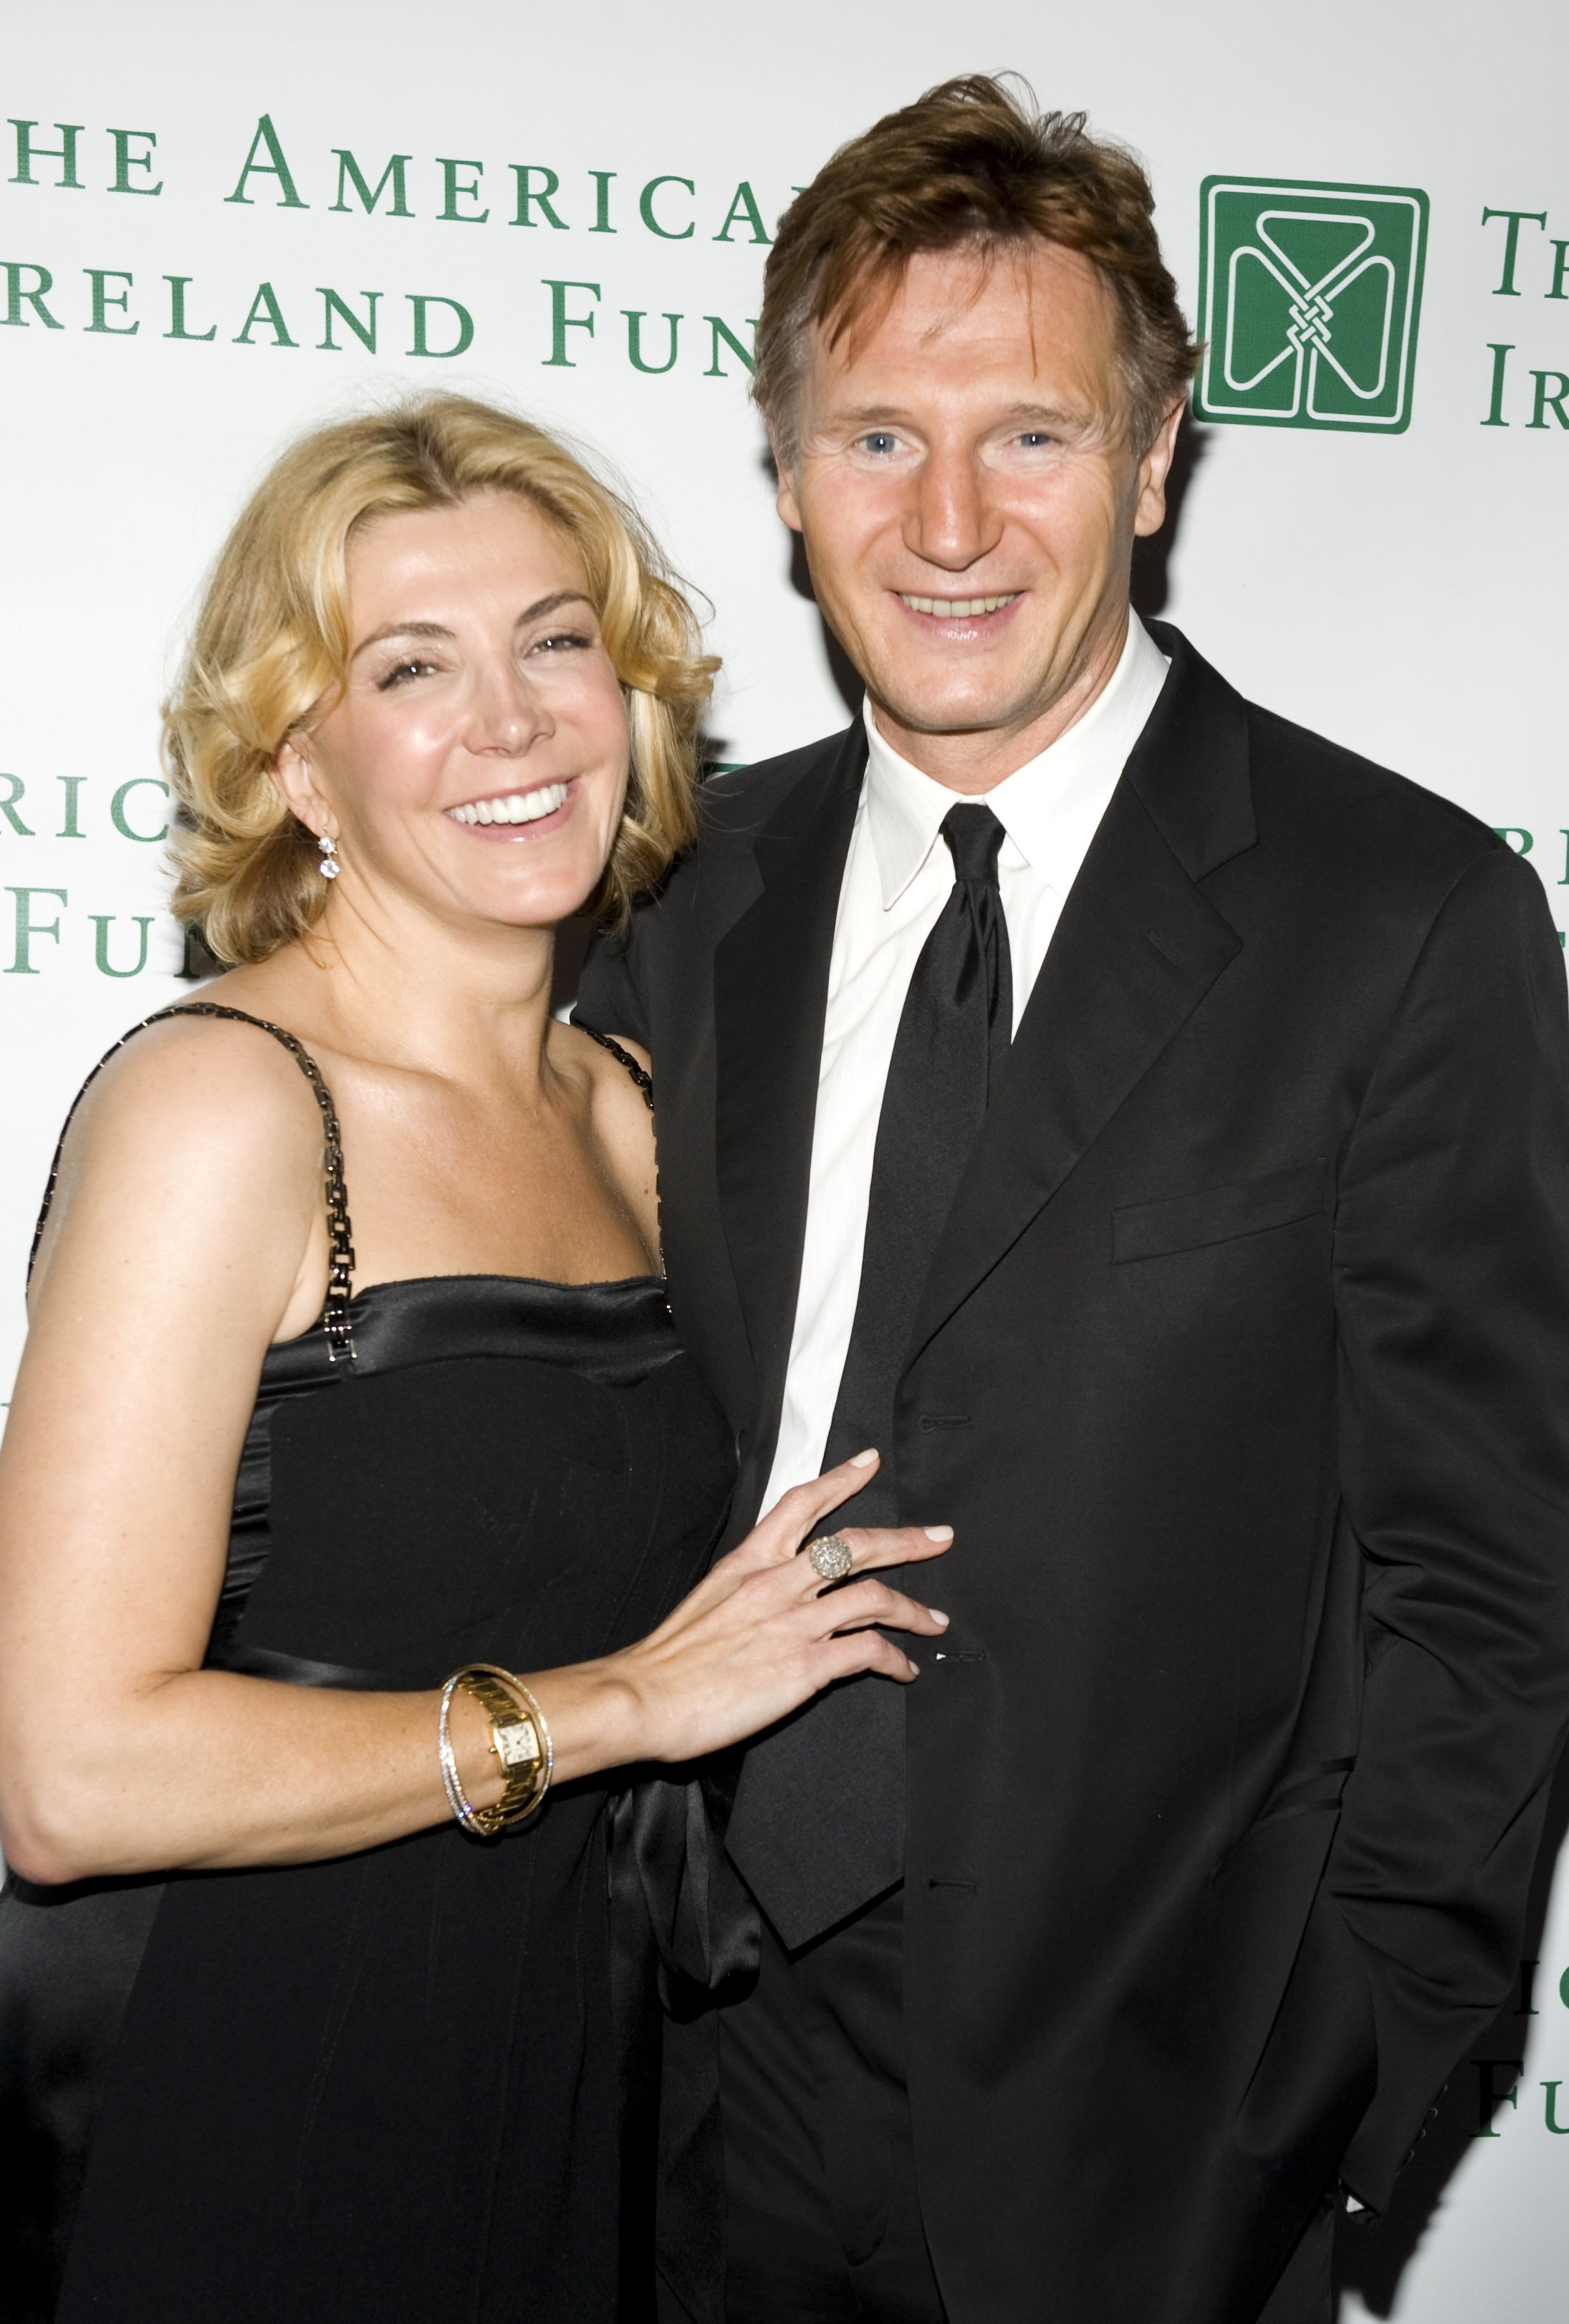 Liam Neeson and Natasha Richardson in New York in 2008 | Source Getty Images